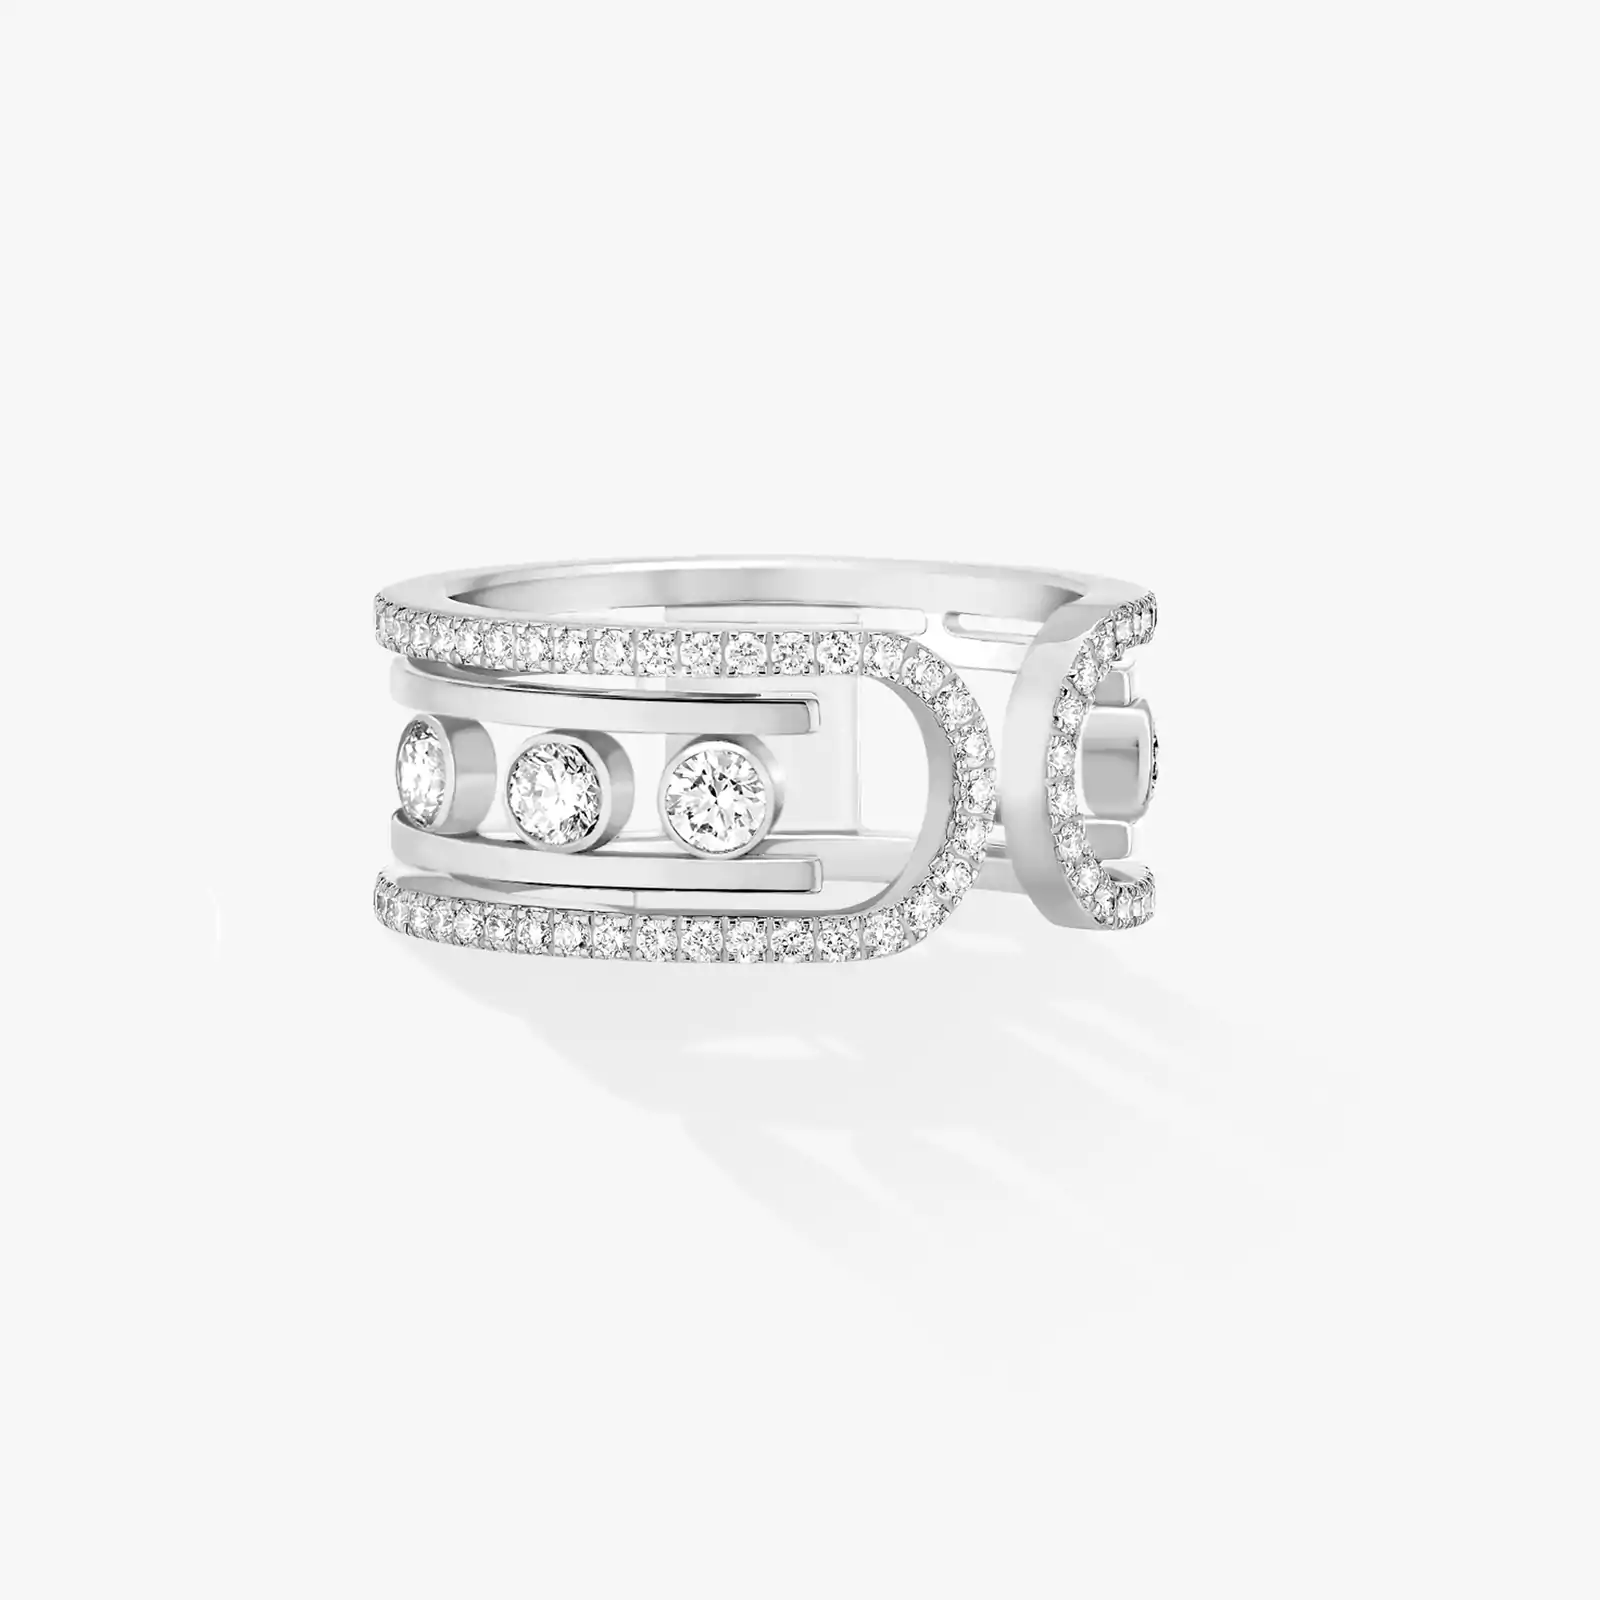 Bague Femme Or Blanc Diamant Move 10th 11955-WG